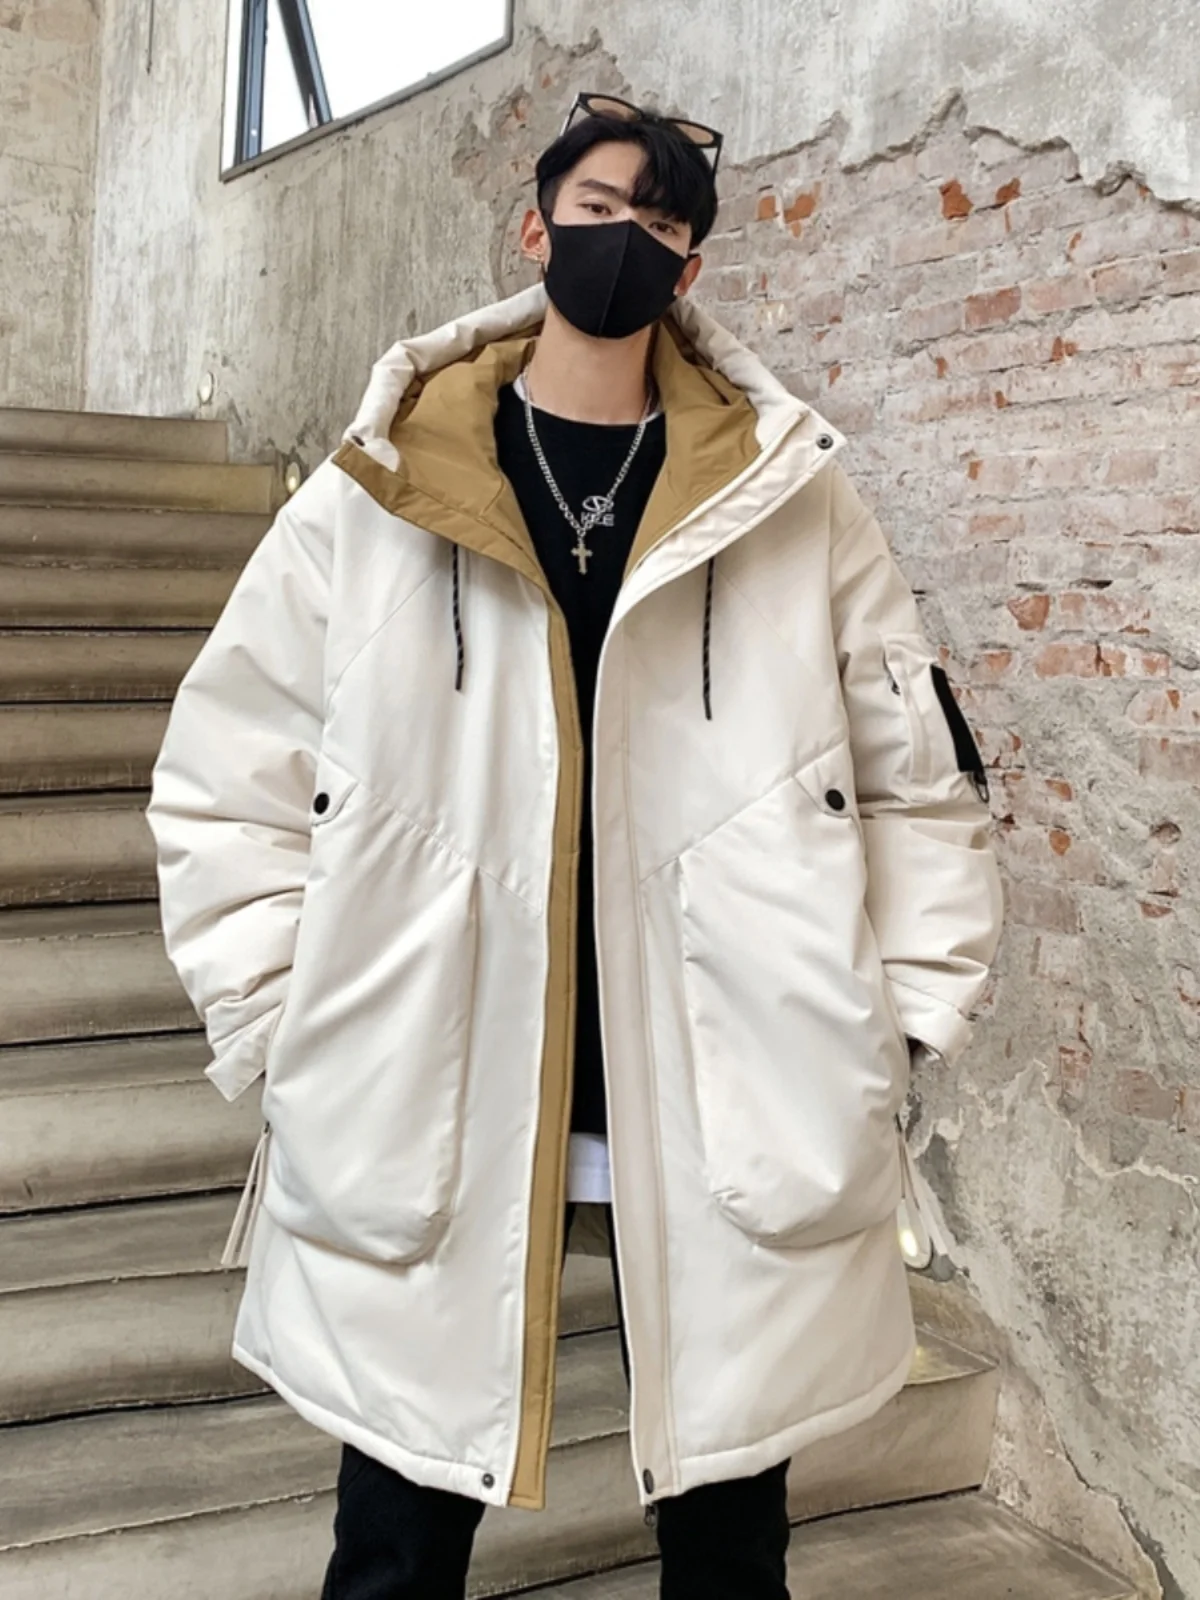 Jacket Mid-Length down Jacket Men's Thickened Warm Winter Cold-Proof Hooded Jacket BlackWhite Loose Casual Fashion All-Match 1Pc